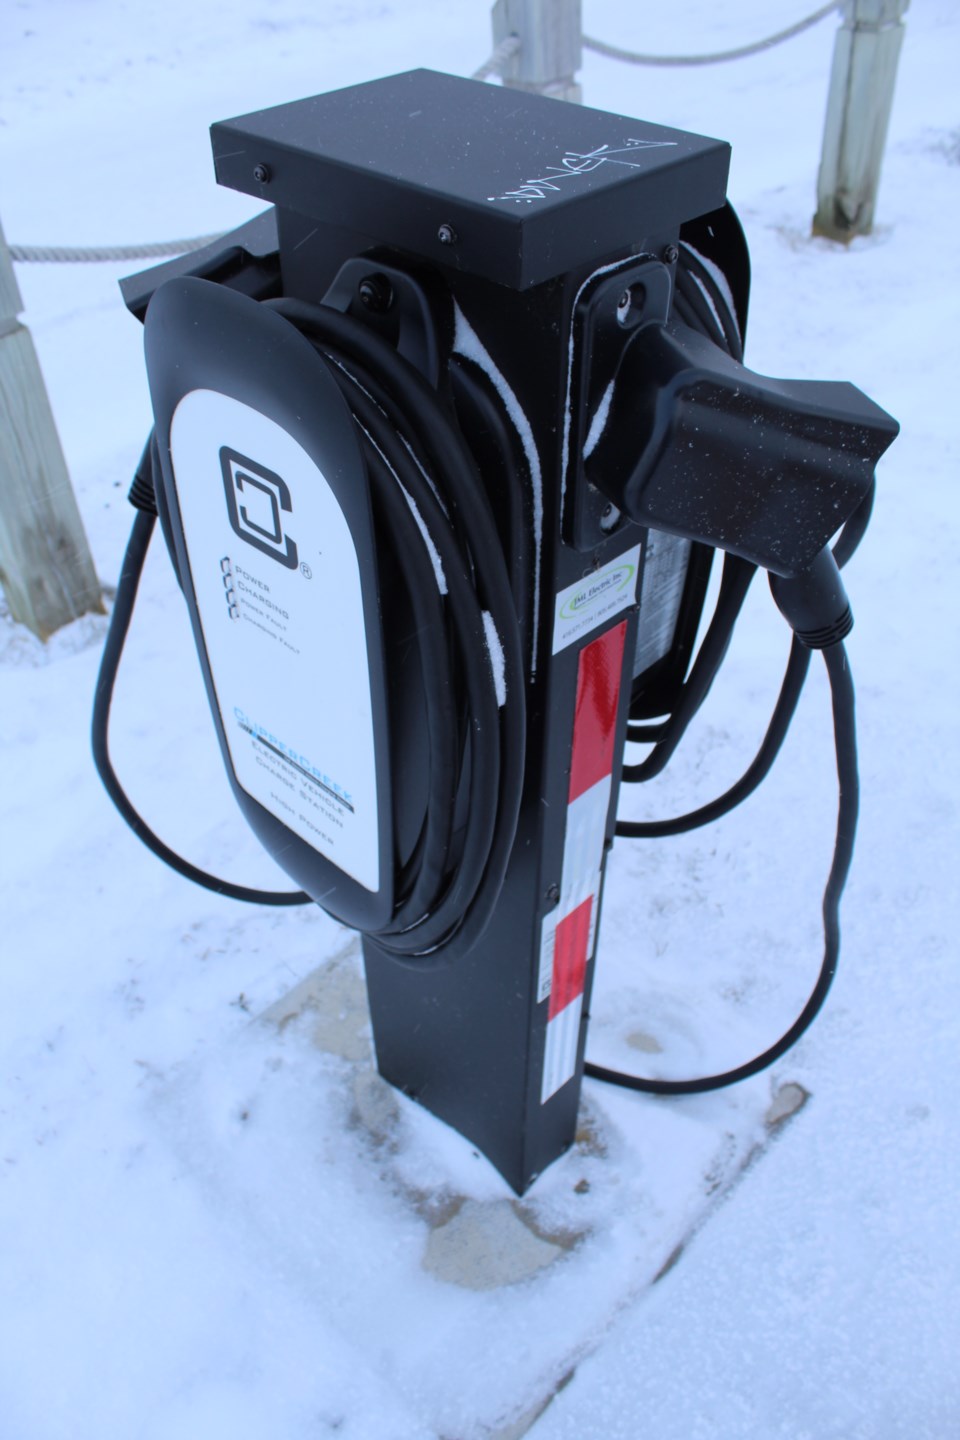 2020-01-08 Electric vehicle charger RB 2